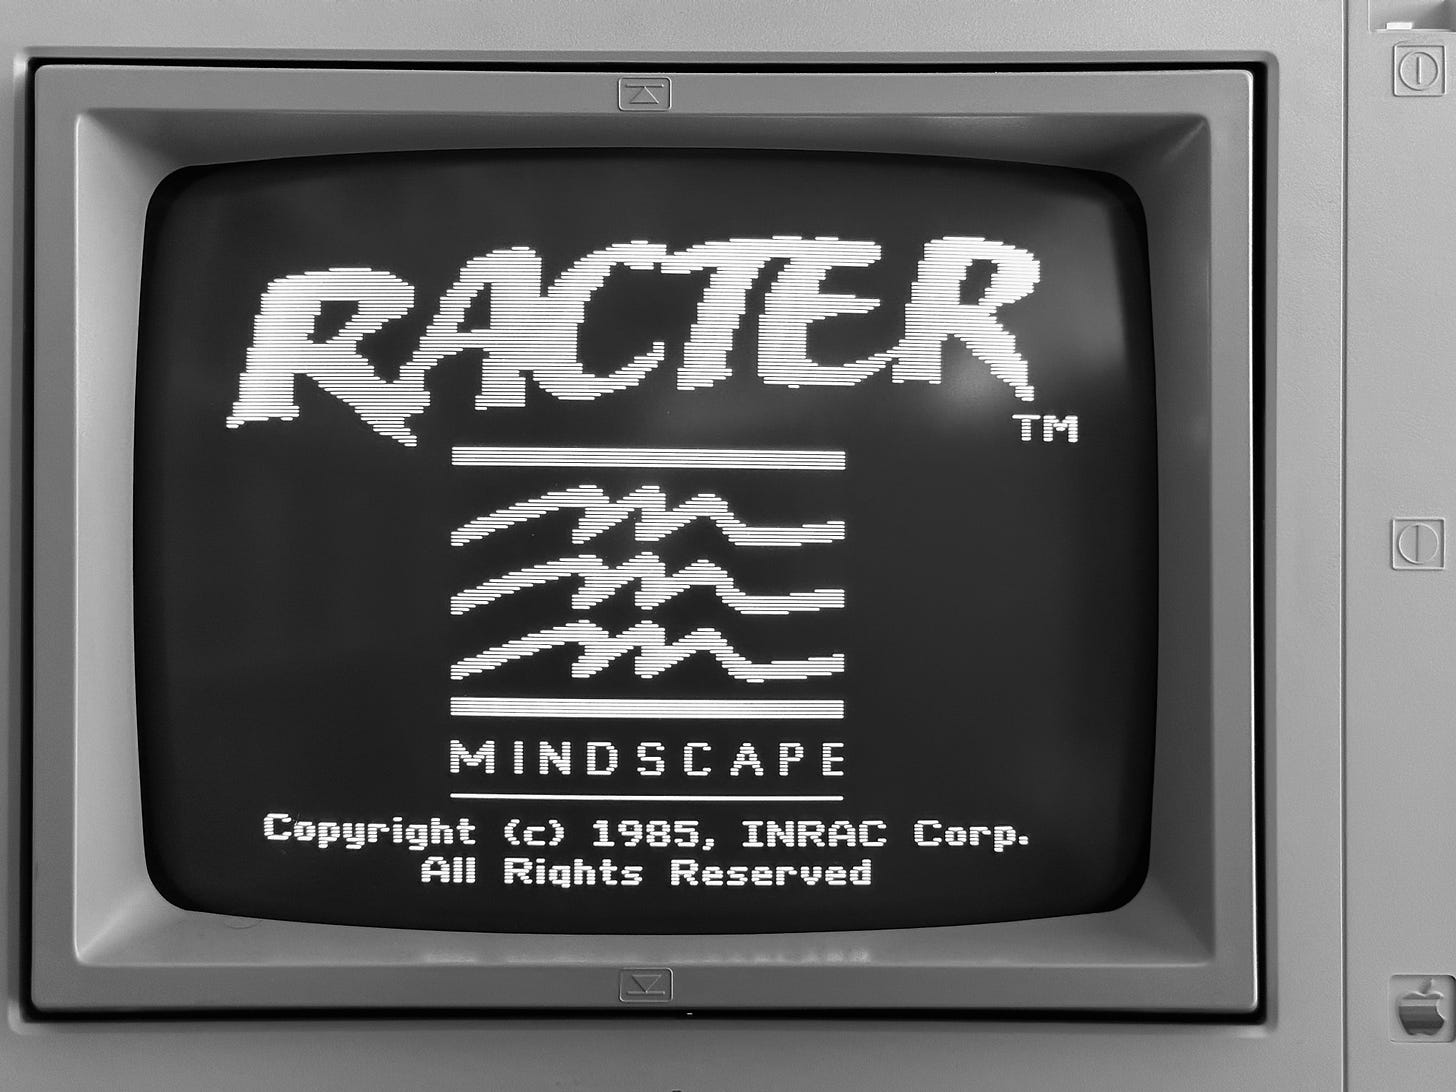 Photo of a computer monitor displaying the title screen for a program named "Racter" with a 1985 copyright date.